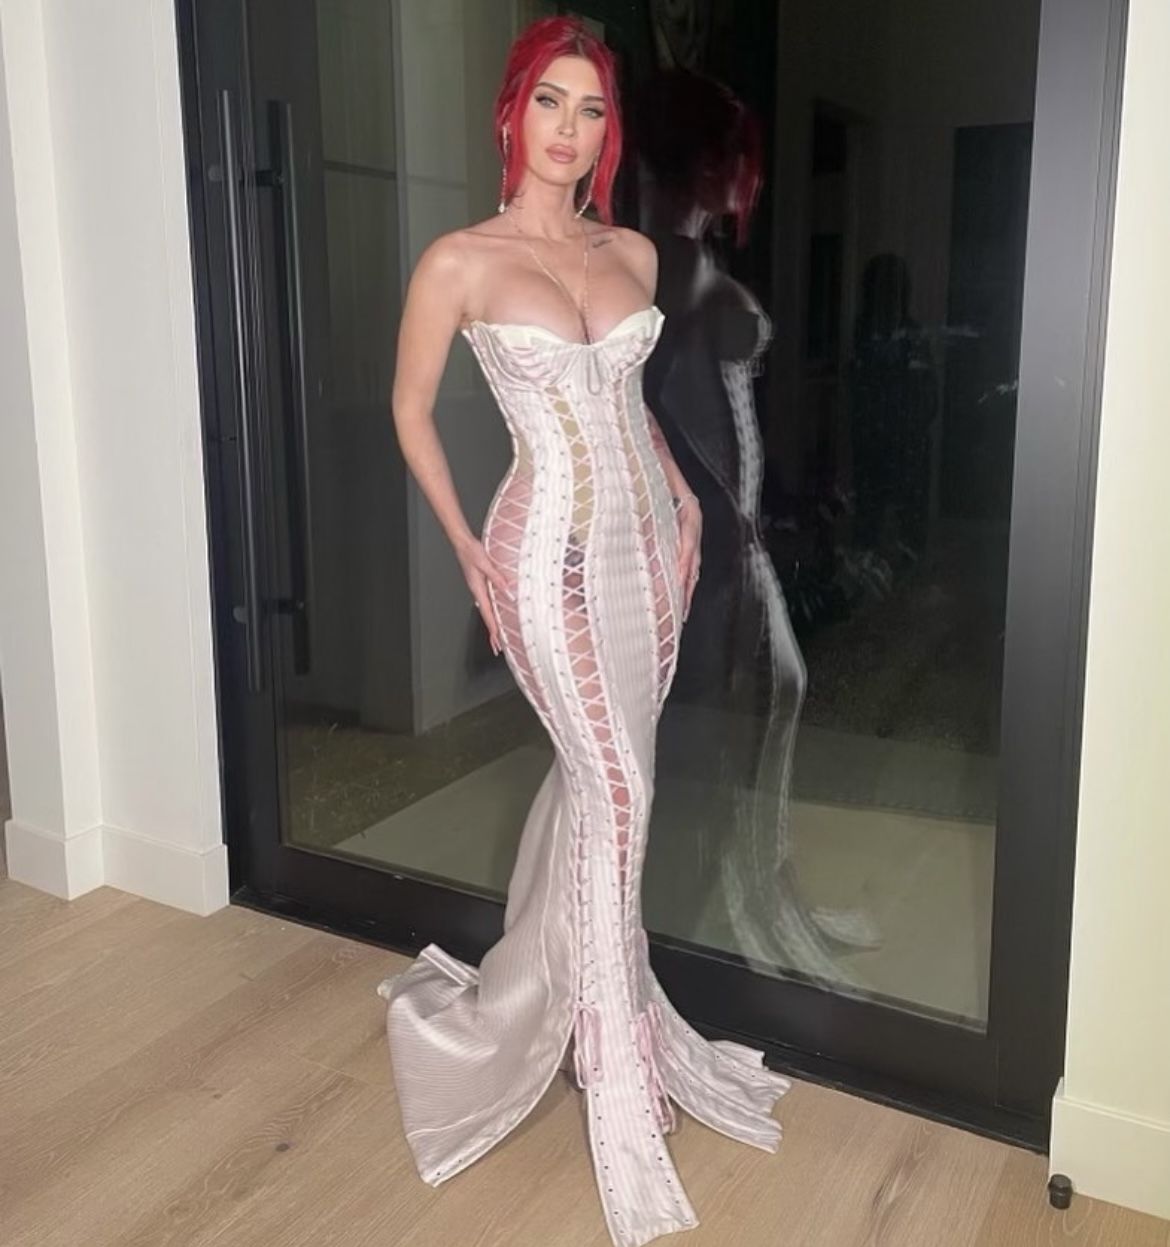 Megan Fox Is a Vixen in a White Corset Dress With Cutouts All Over